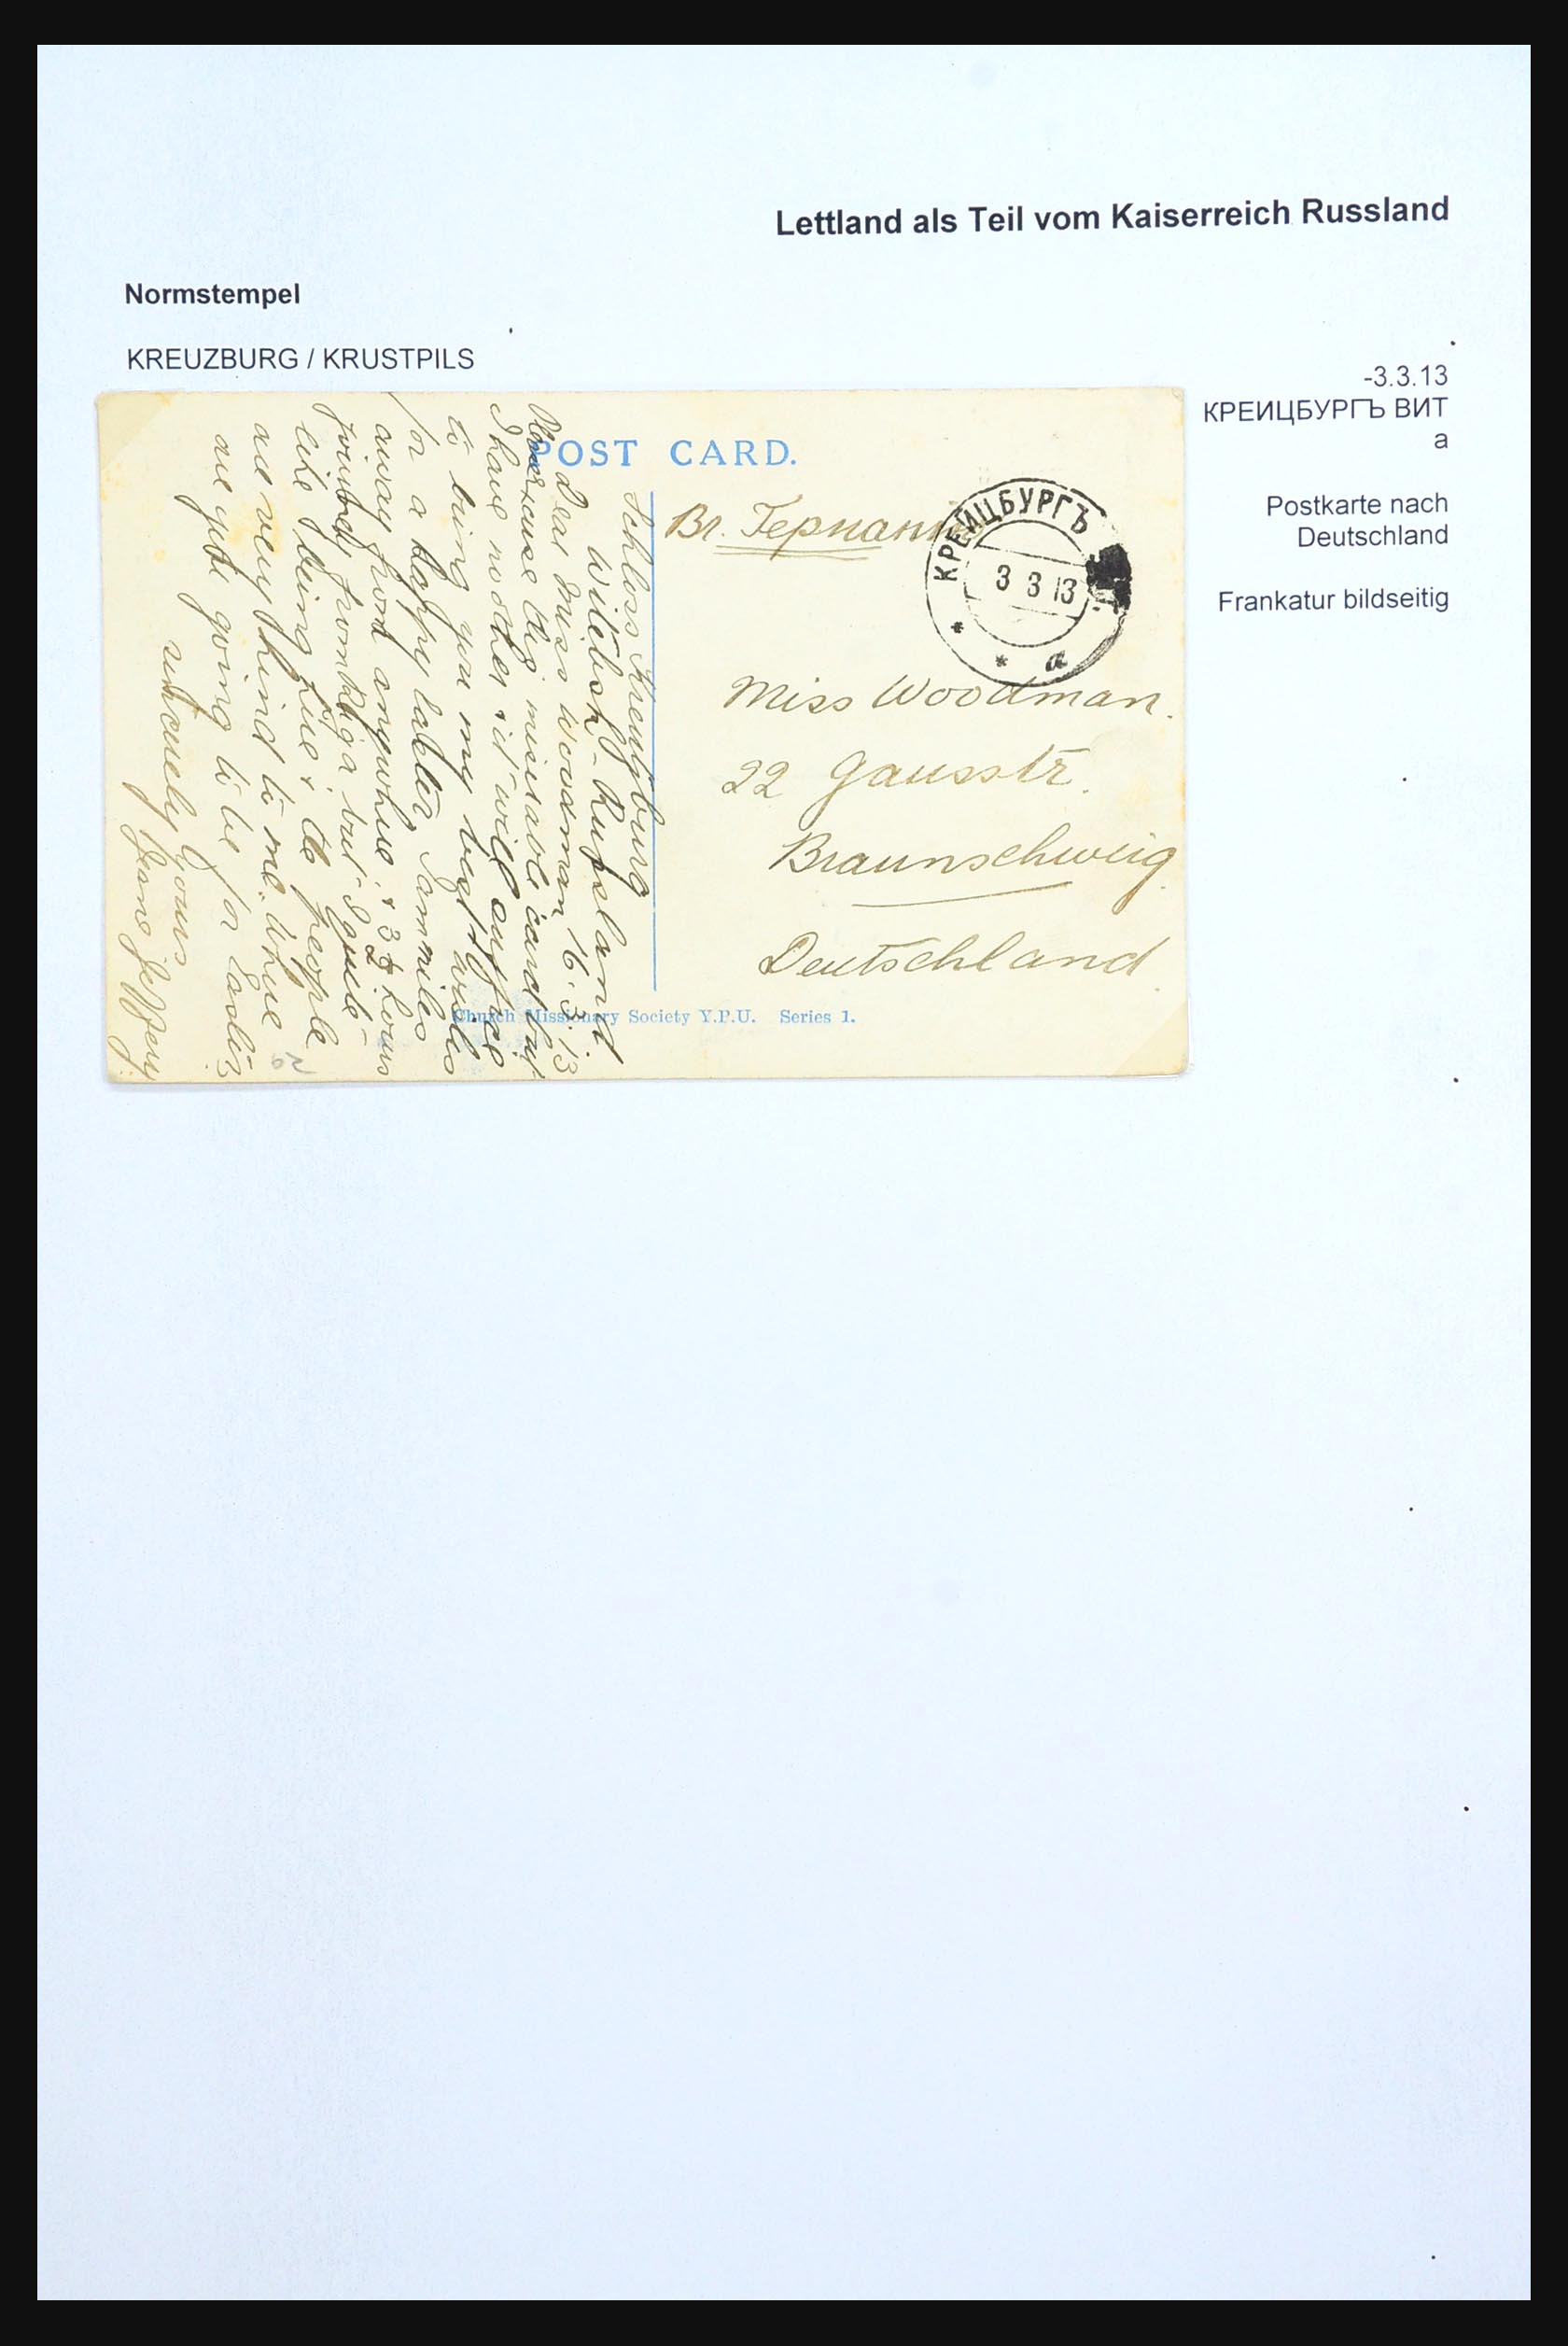 31305 074 - 31305 Latvia as part of Russia 1817-1918.